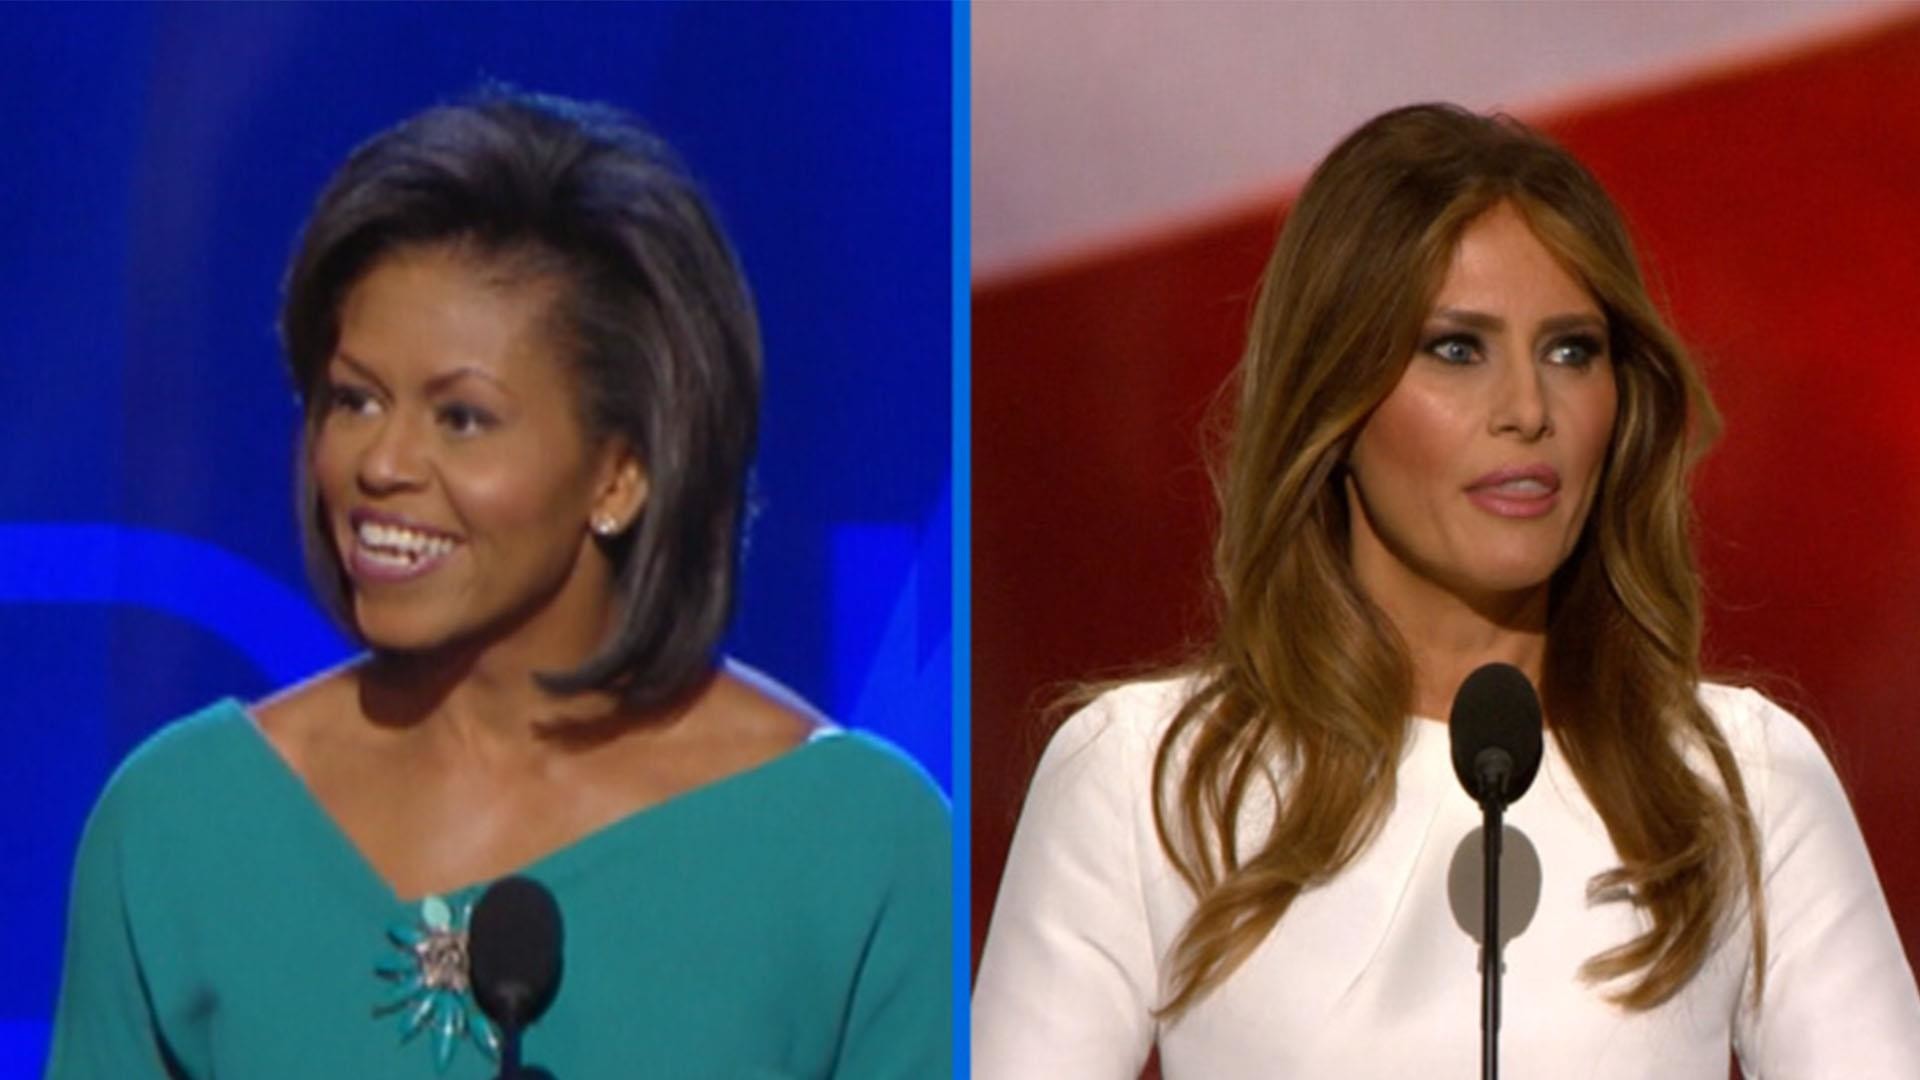 1920x1080 Michelle Obama and Melania Trump lines: similarities side by side - NBC News